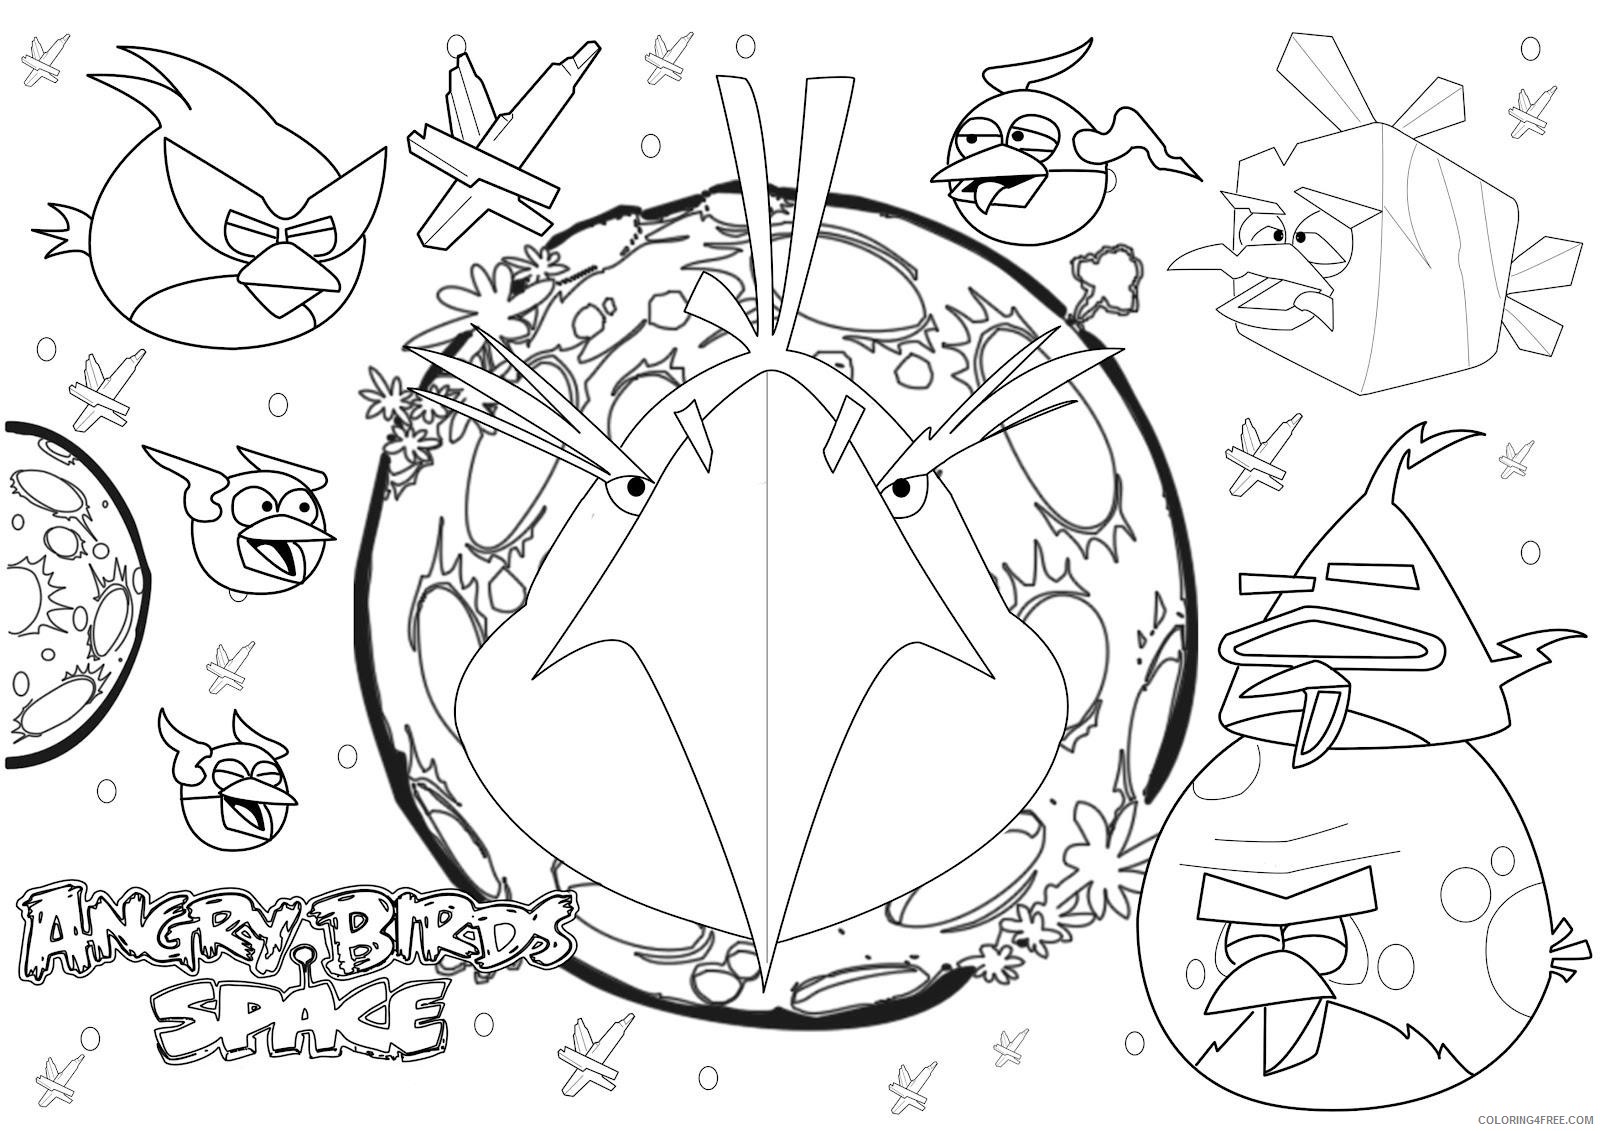 Angry Birds Coloring Pages Printable Coloring4free